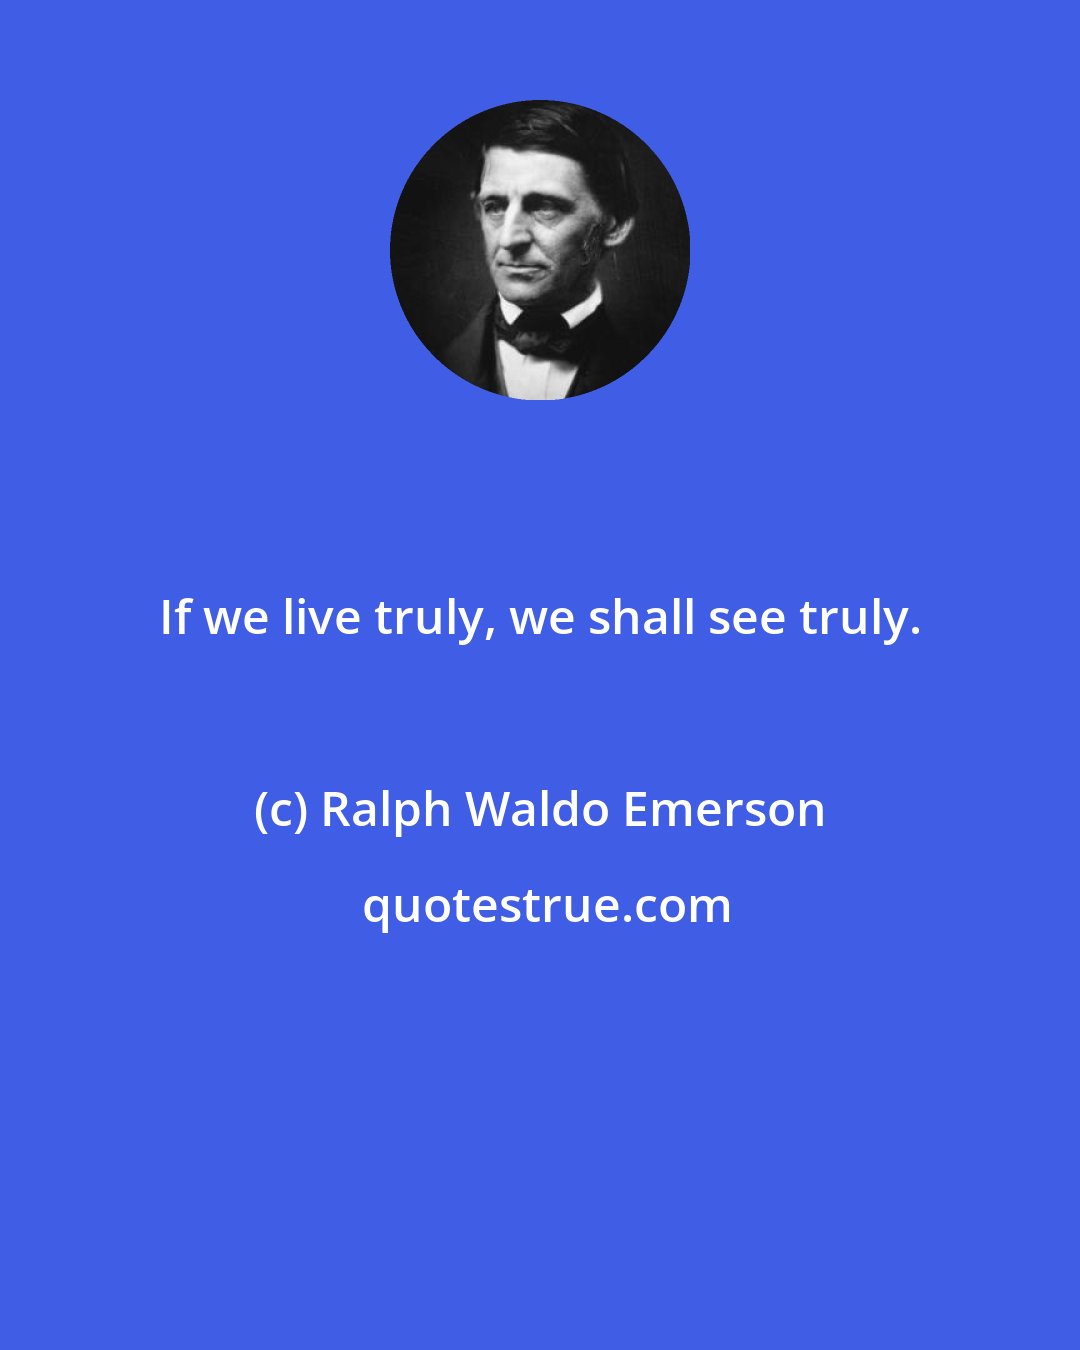 Ralph Waldo Emerson: If we live truly, we shall see truly.